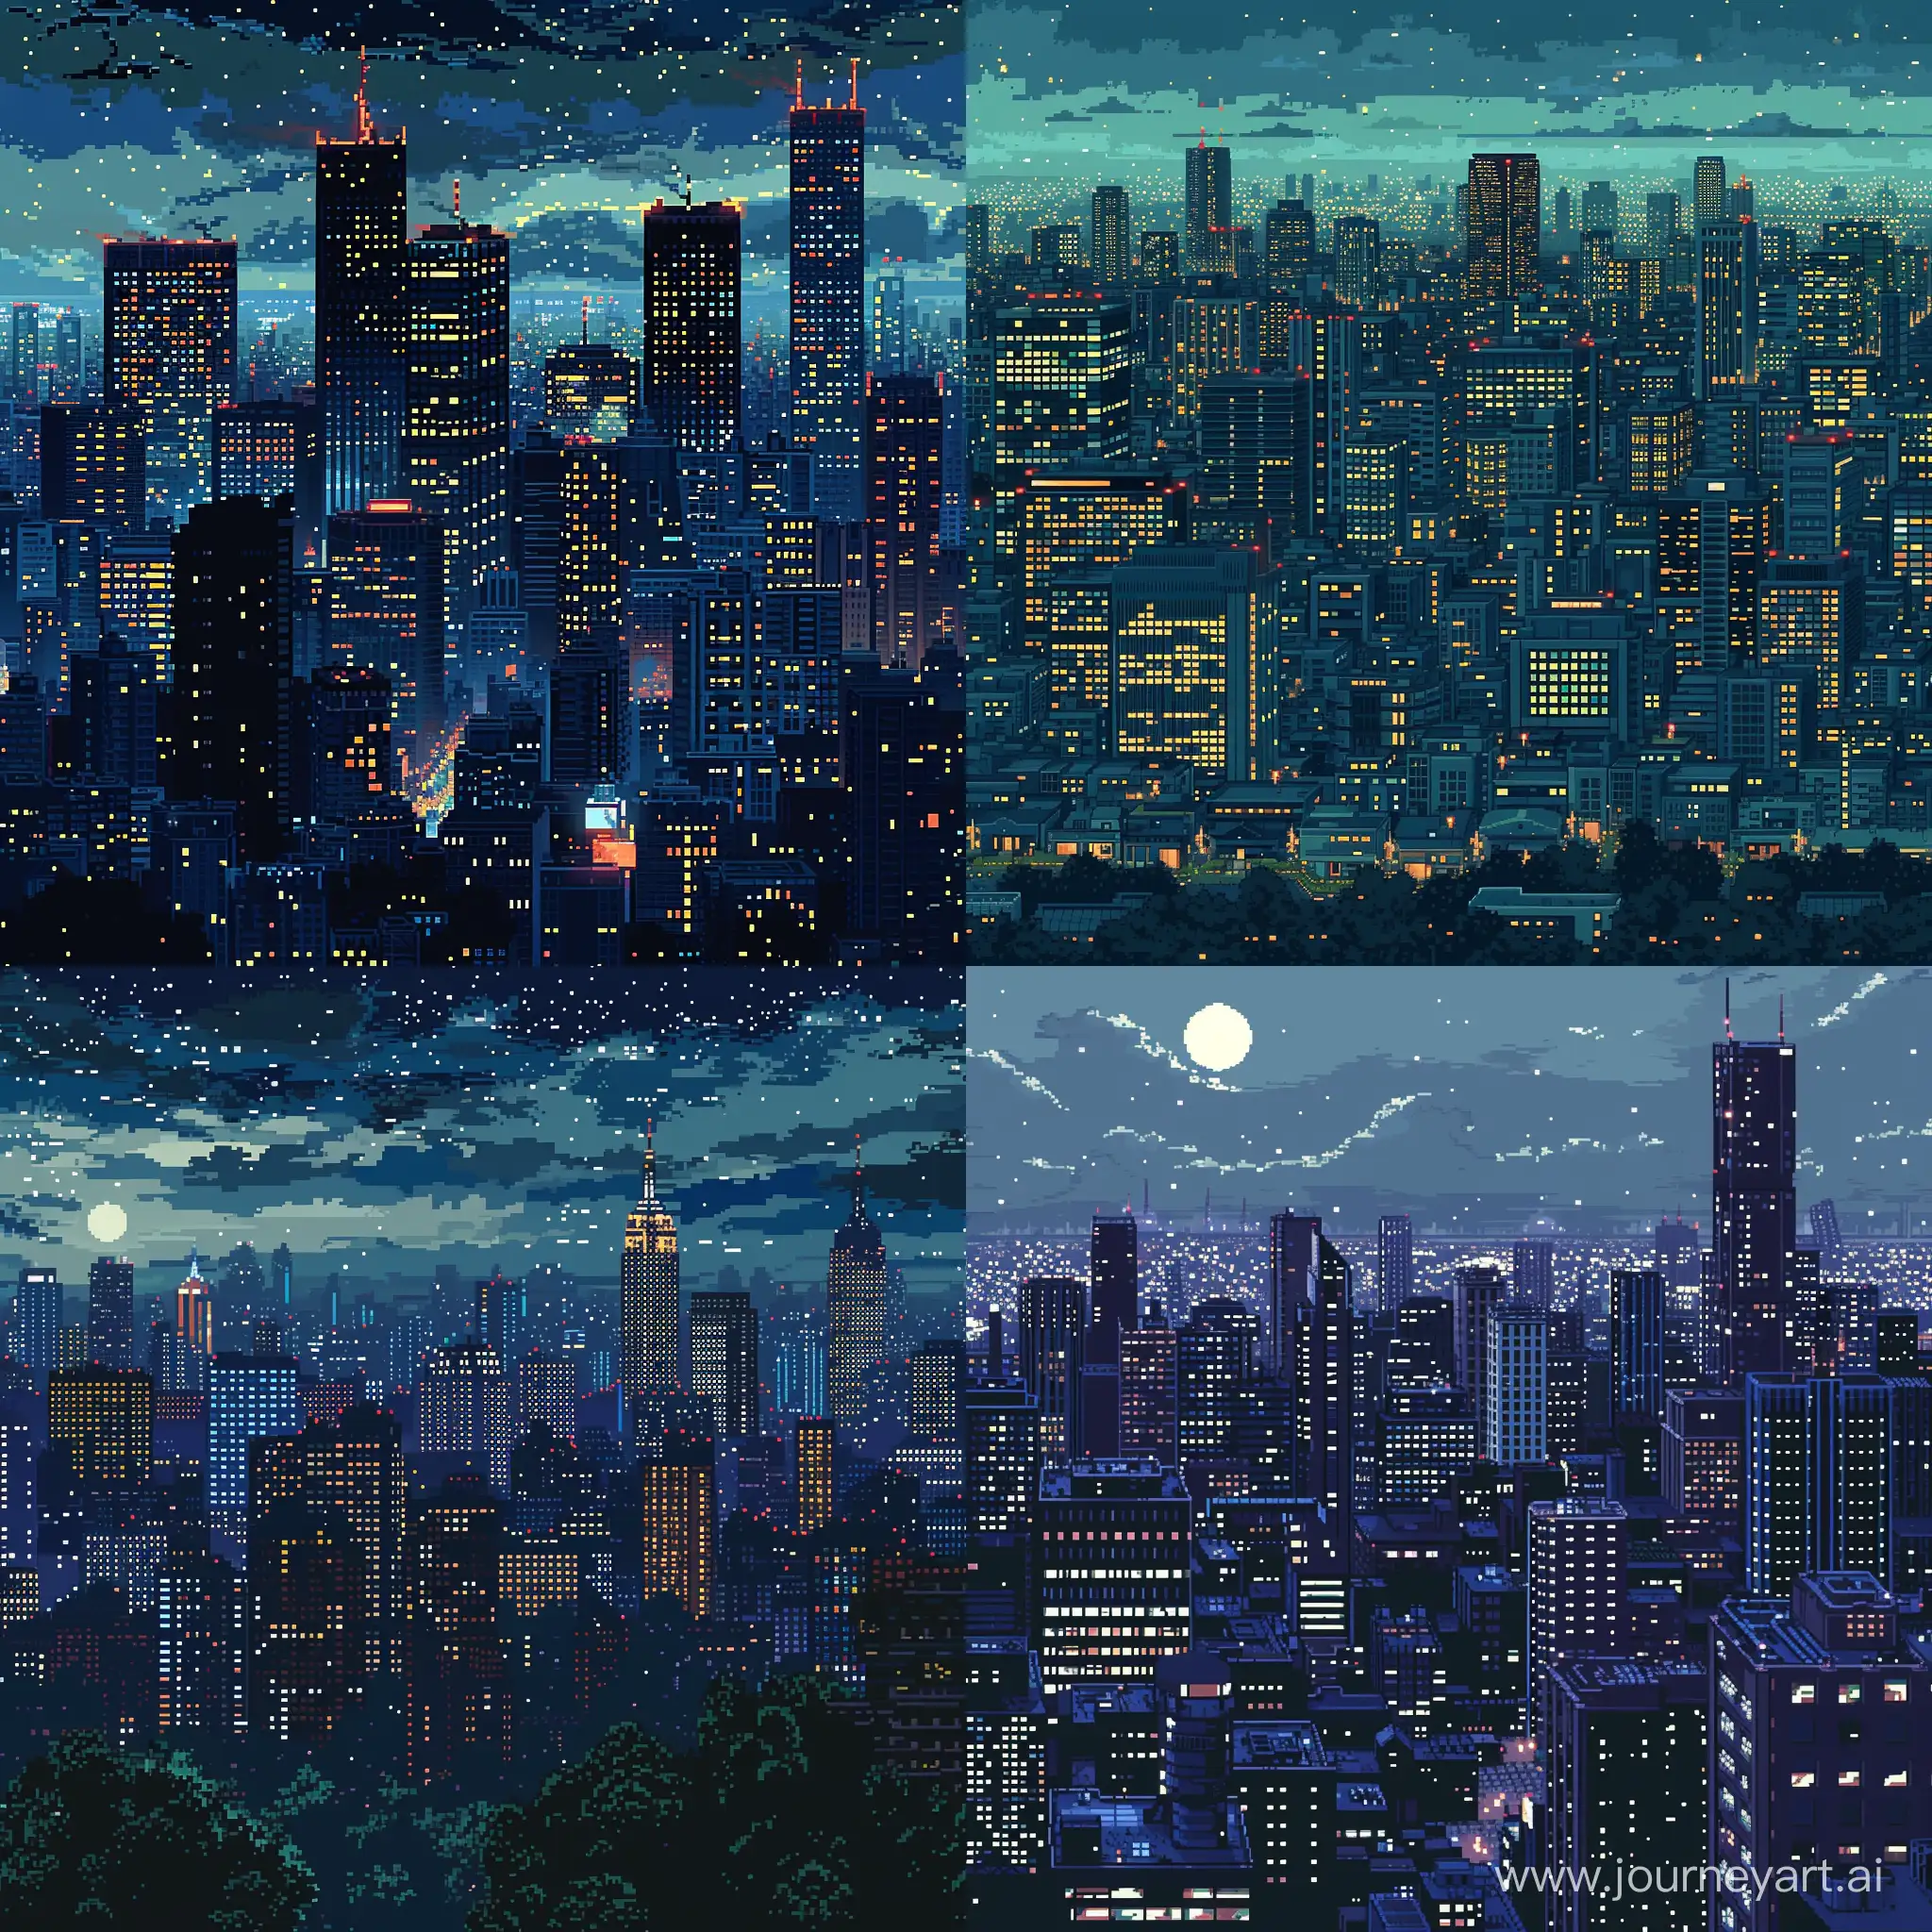 8-bit style, landscape architecture of a big city in the night, with lots of light, but full of darkness, retro design, no perspective, we are not in the city, we just look the city from an outside, more texture, 